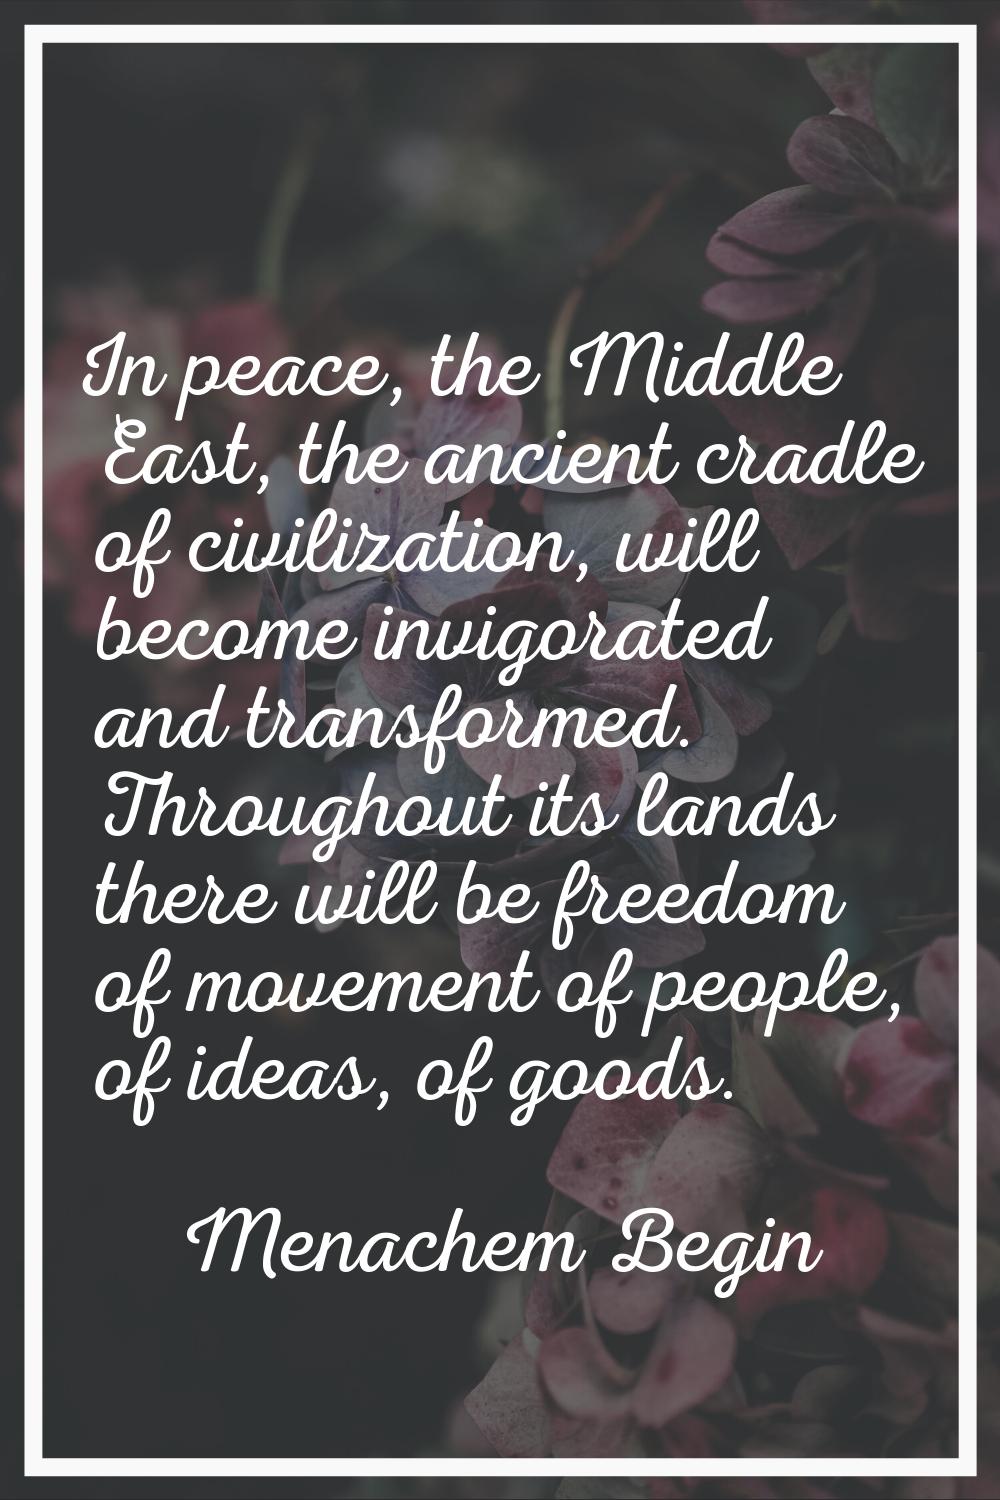 In peace, the Middle East, the ancient cradle of civilization, will become invigorated and transfor